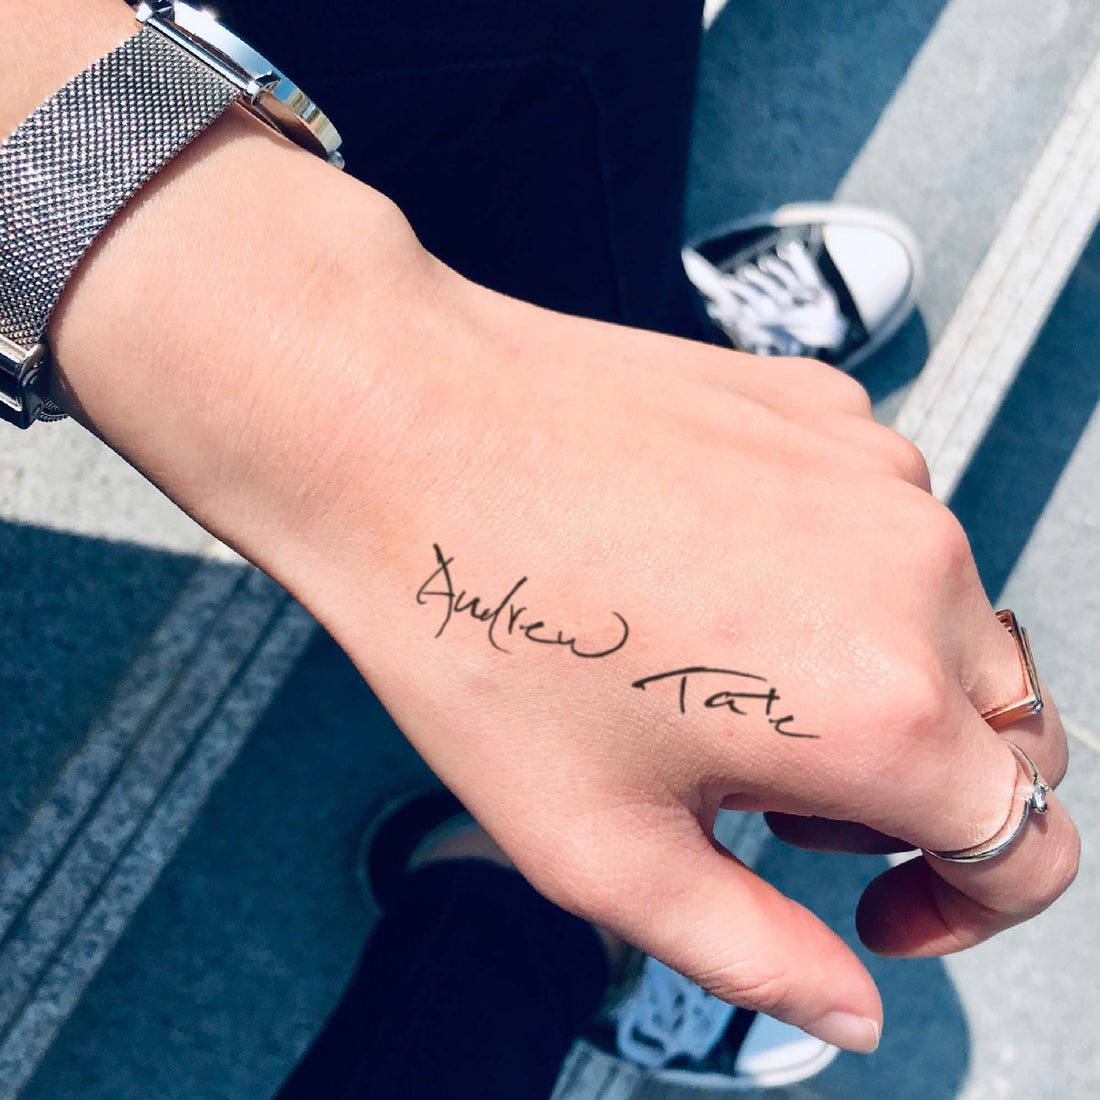 Andrew Tate custom temporary tattoo sticker design idea inspiration meanings removal arm wrist hand words font name signature calligraphy lyrics tour concert outfits merch accessory gift souvenir costumes wear dress up code